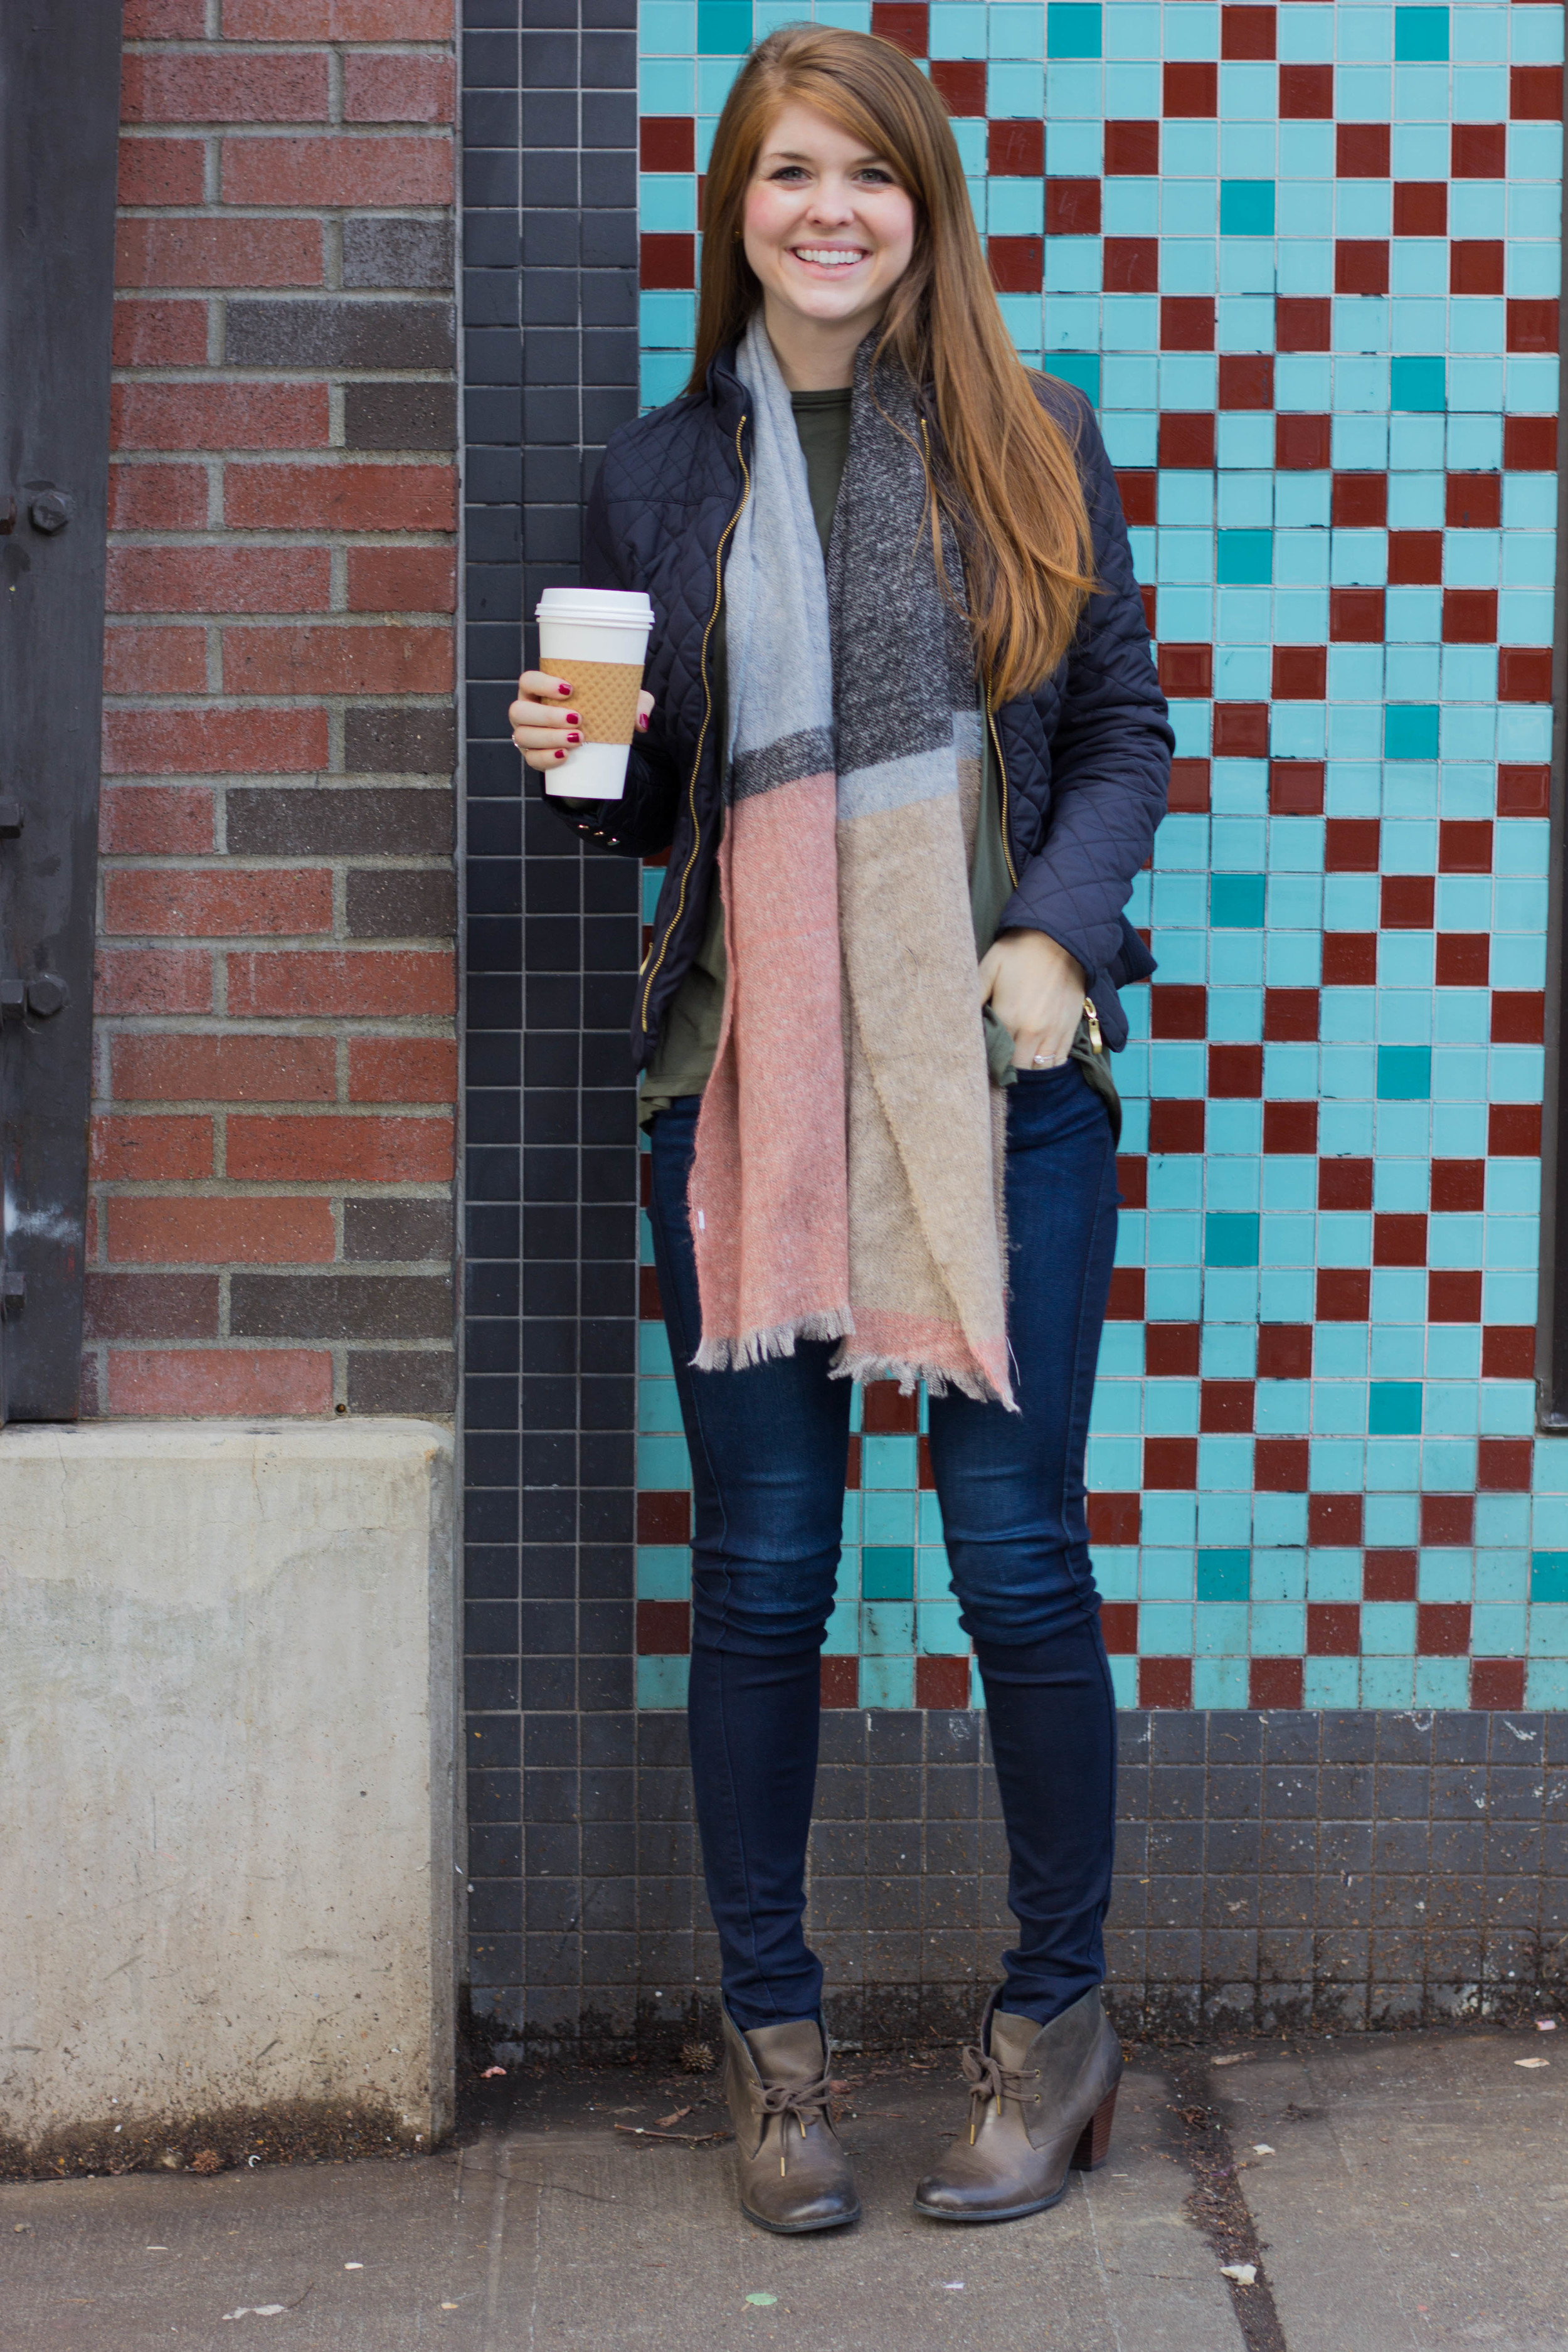 piko top, fidelity beleveder jeans, indigo by clars booties, quilted jacket, stumptown roasters, seattle travel guide